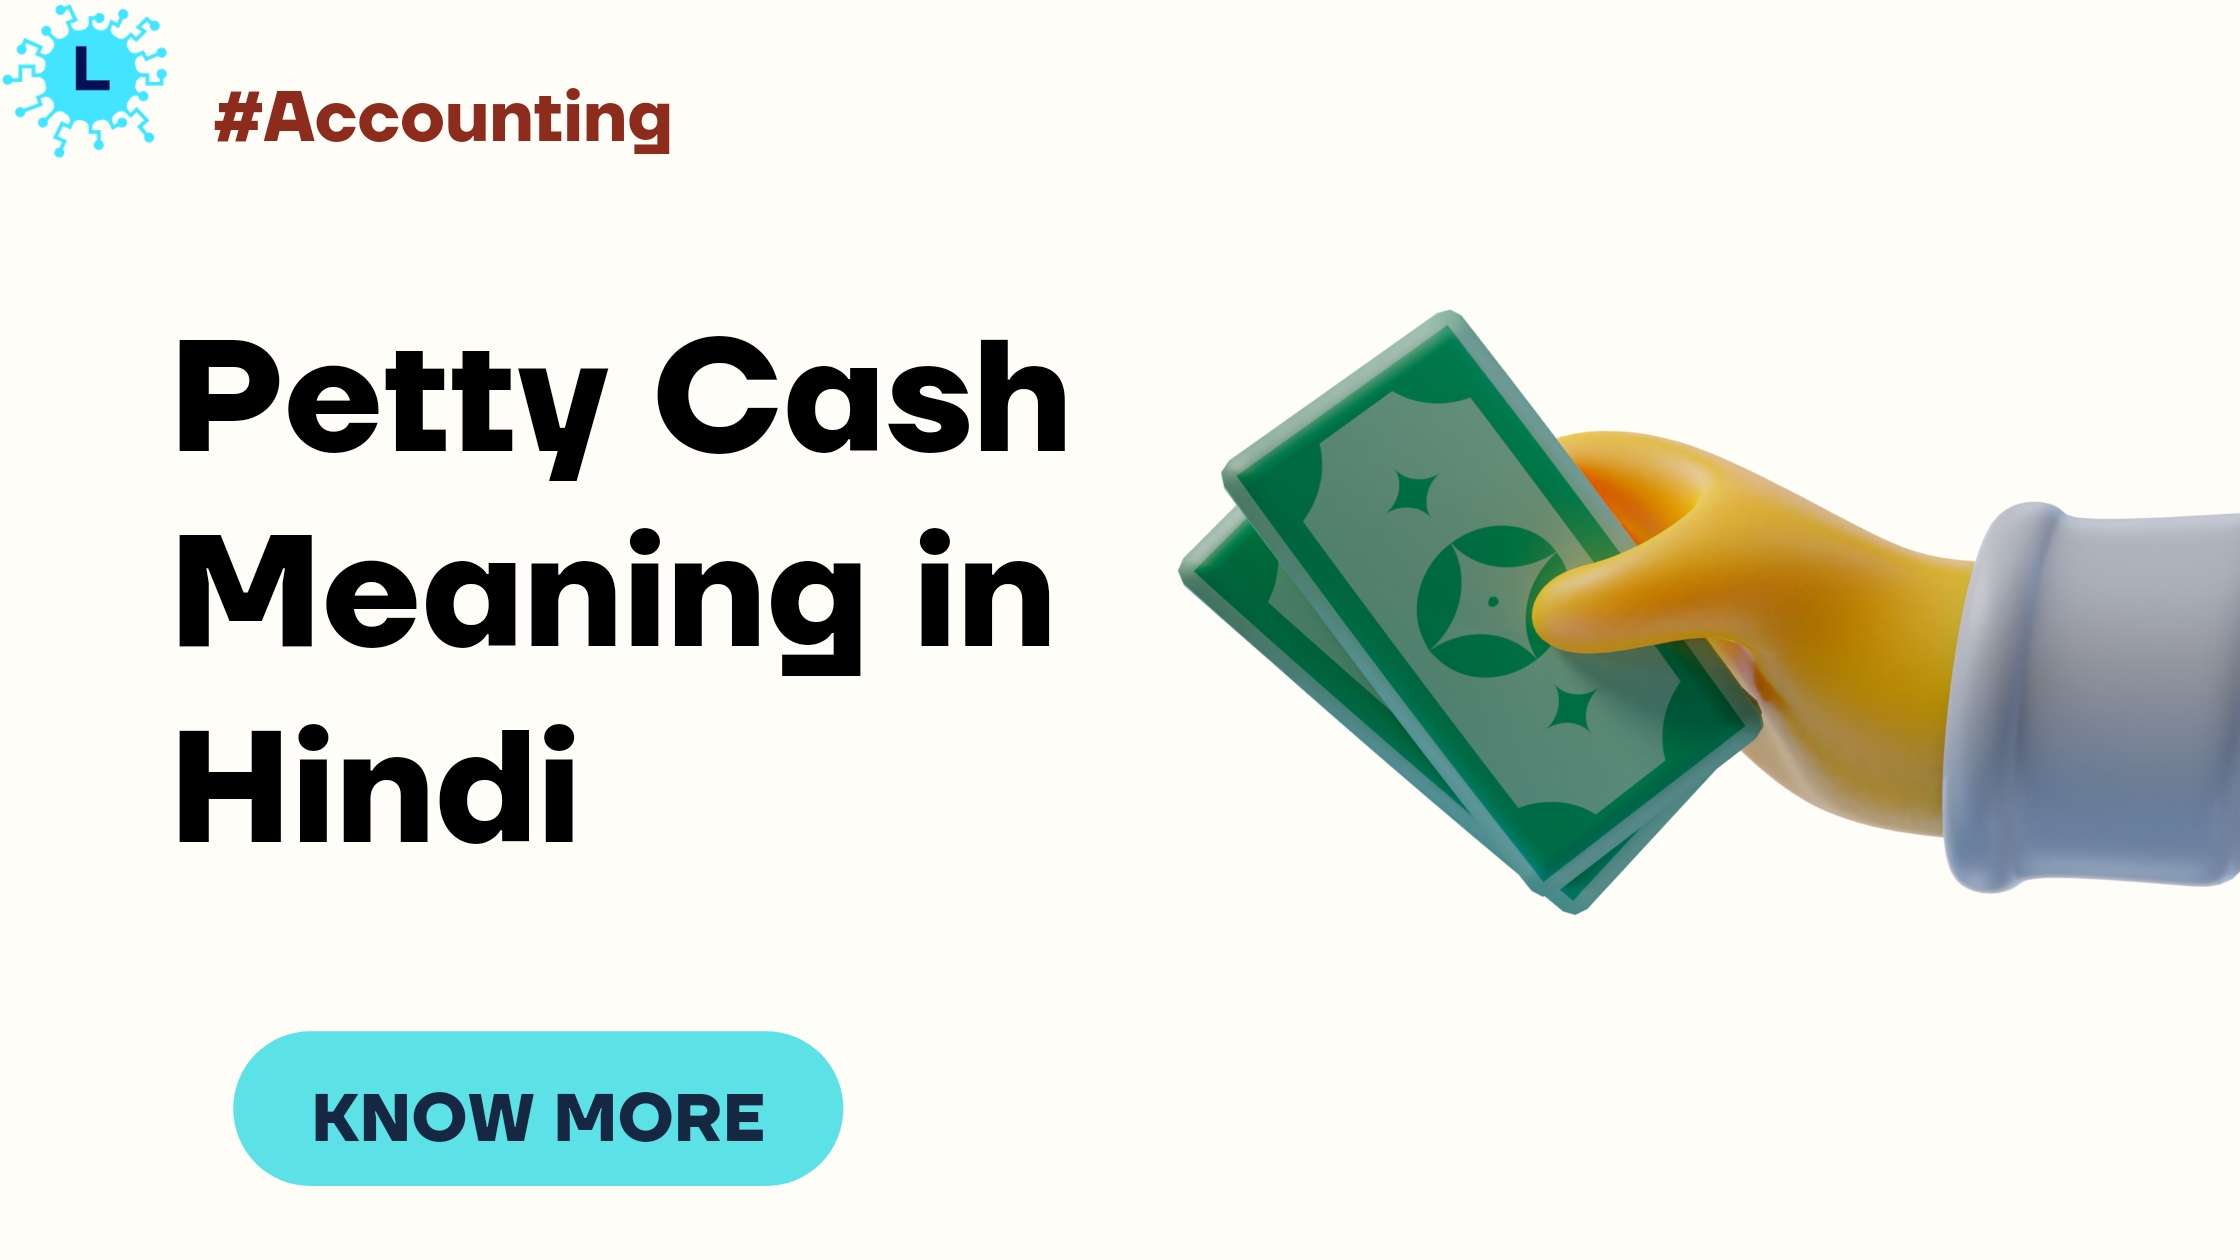 Petty Cash Meaning in Hindi